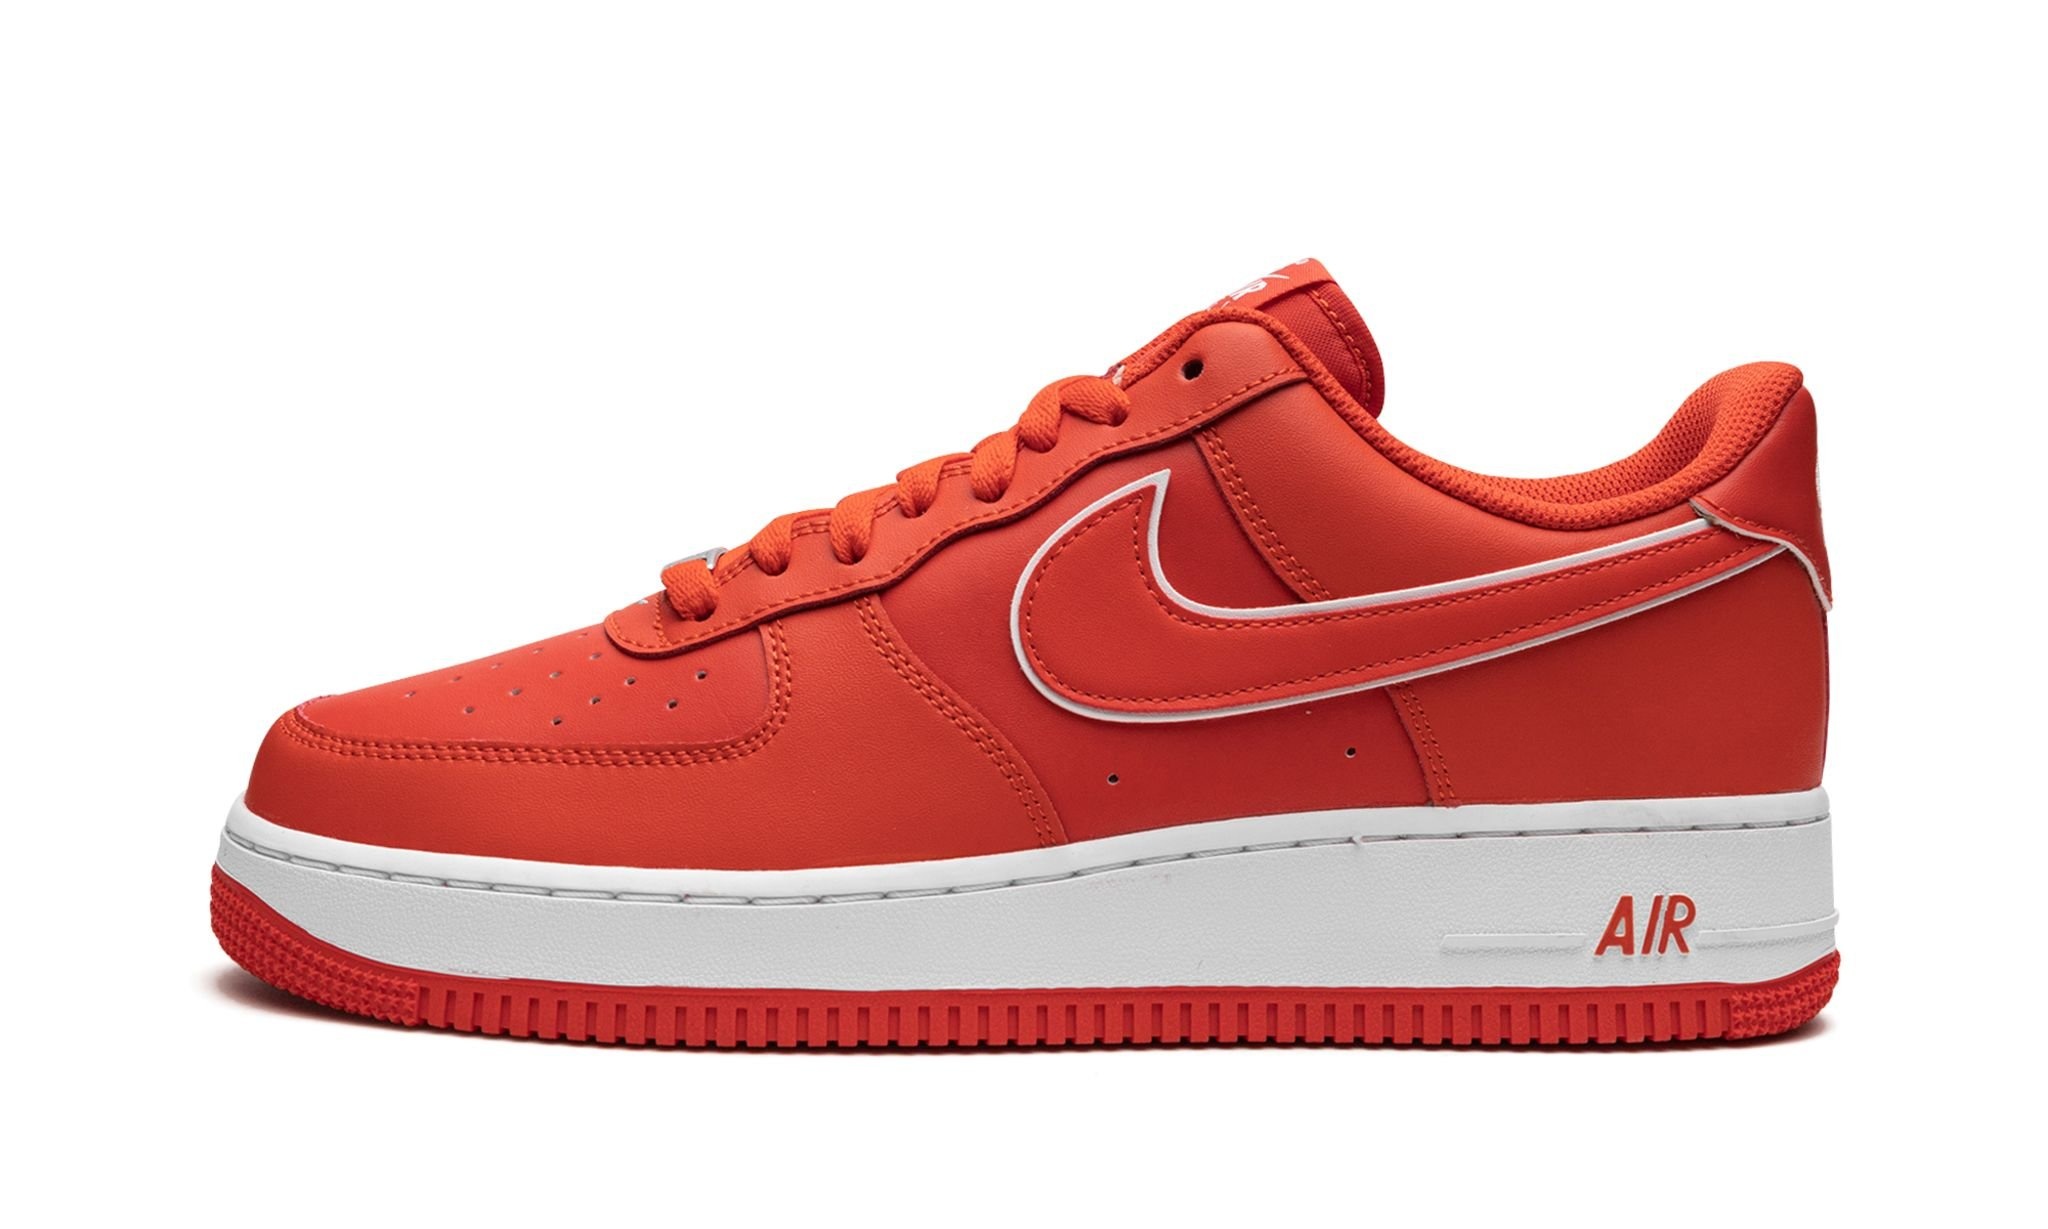 Air Force 1 '07 "Picante Red" - 1